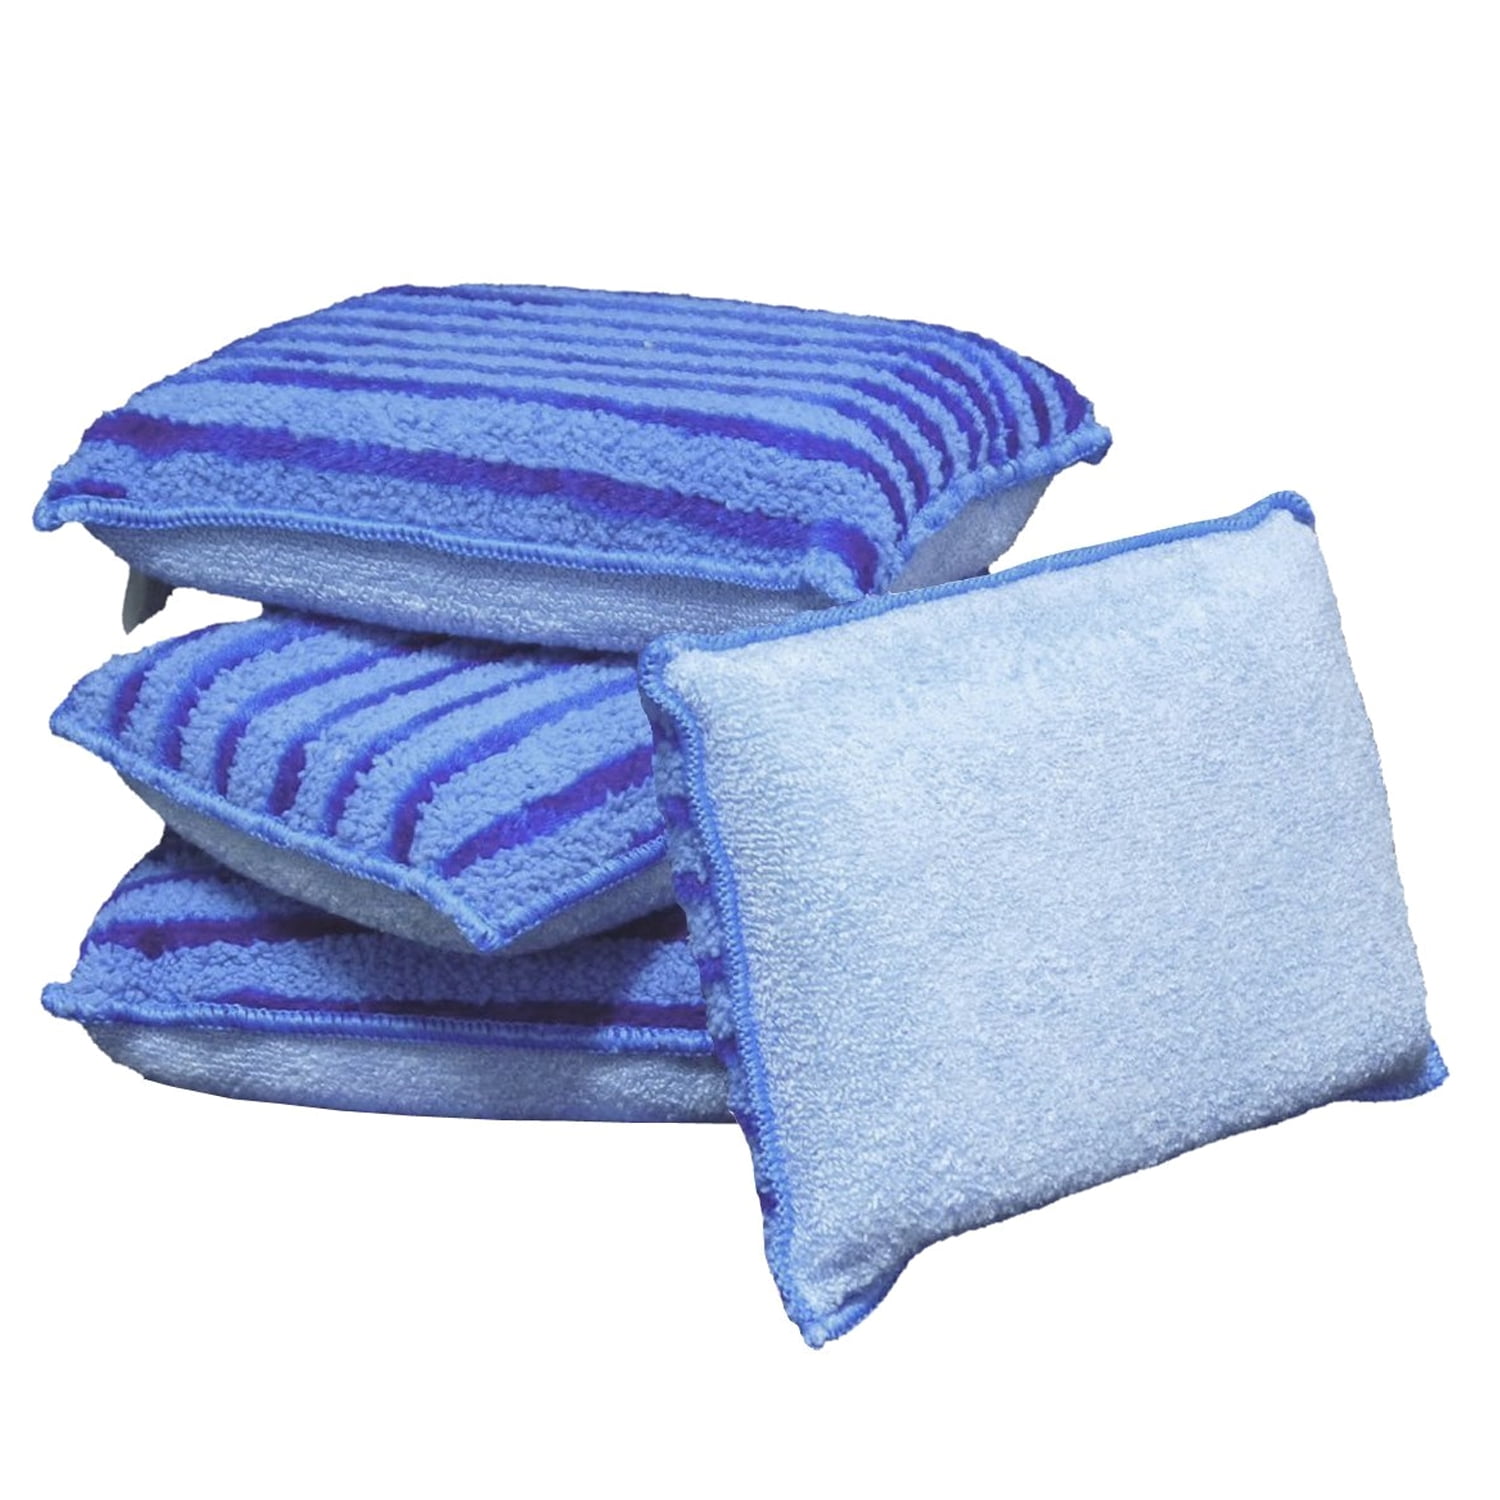  Muddy Mat® AS-SEEN-ON-TV Highly Absorbent Microfiber